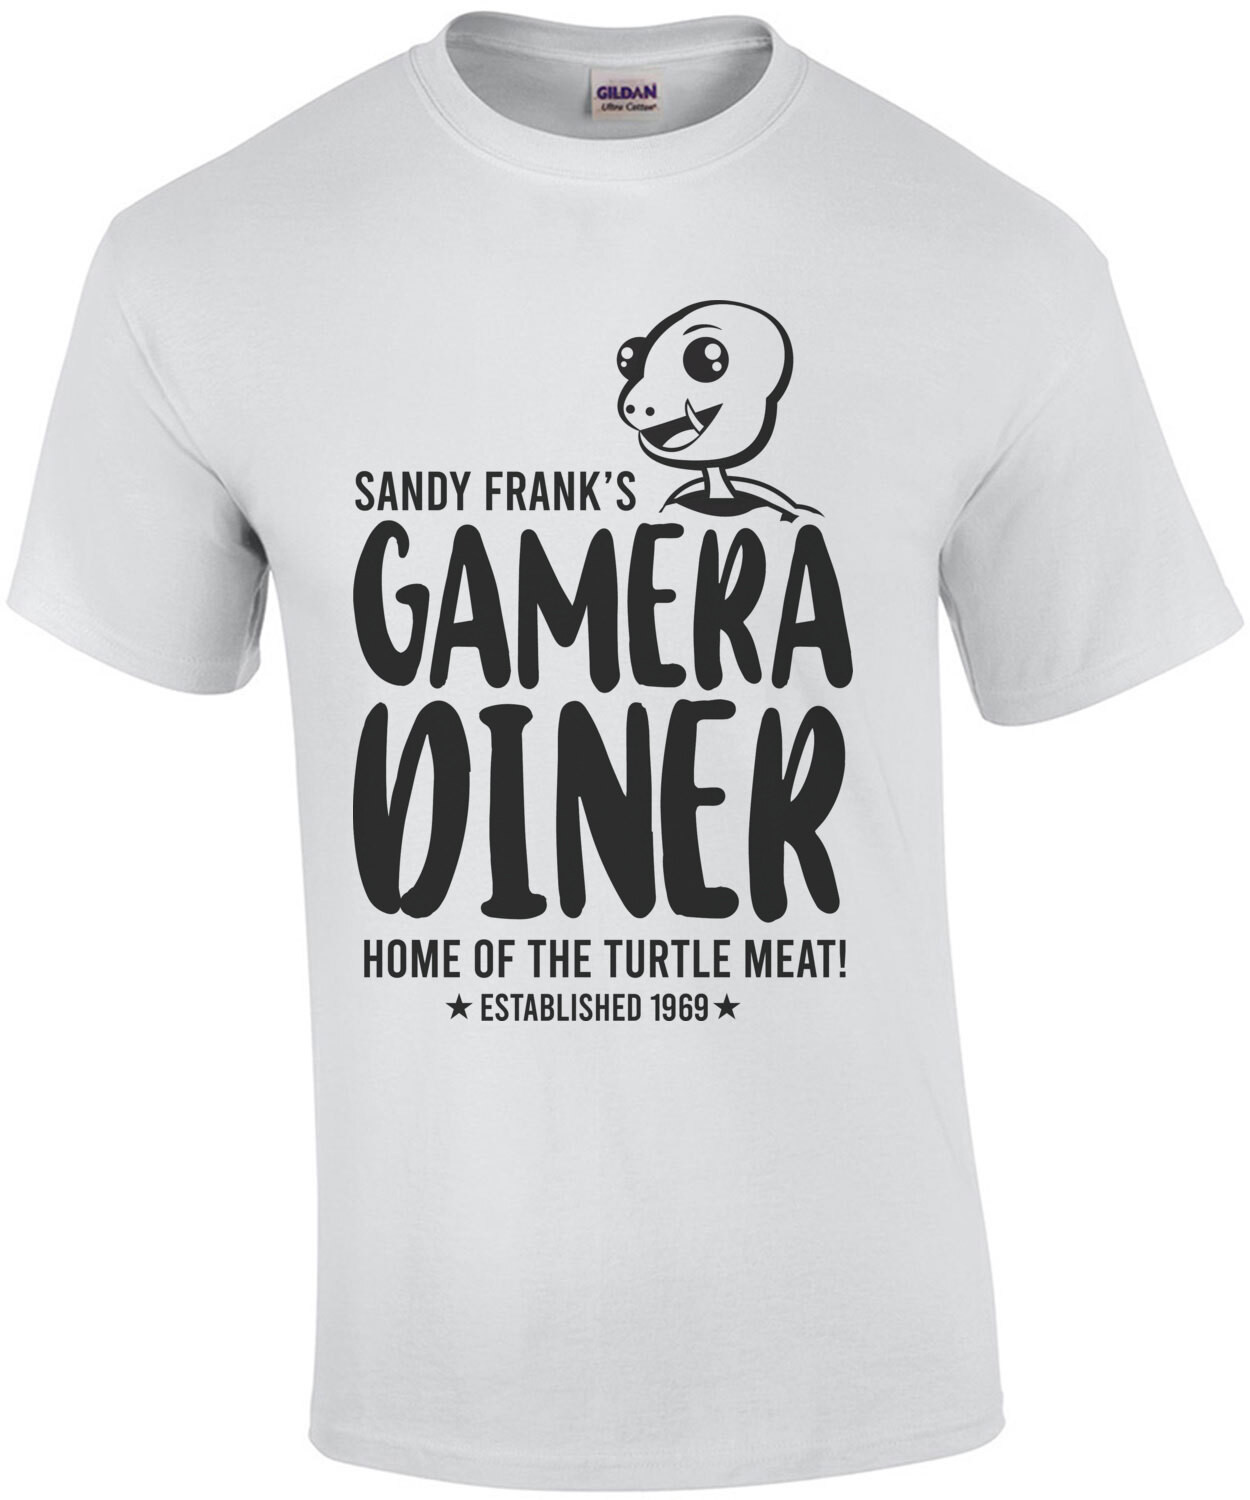 Sandy Frank's Gamera Diner - Home of the turtle meat! - Established 1969 - Mystery Science Theater 3000 - 80's T-Shirt